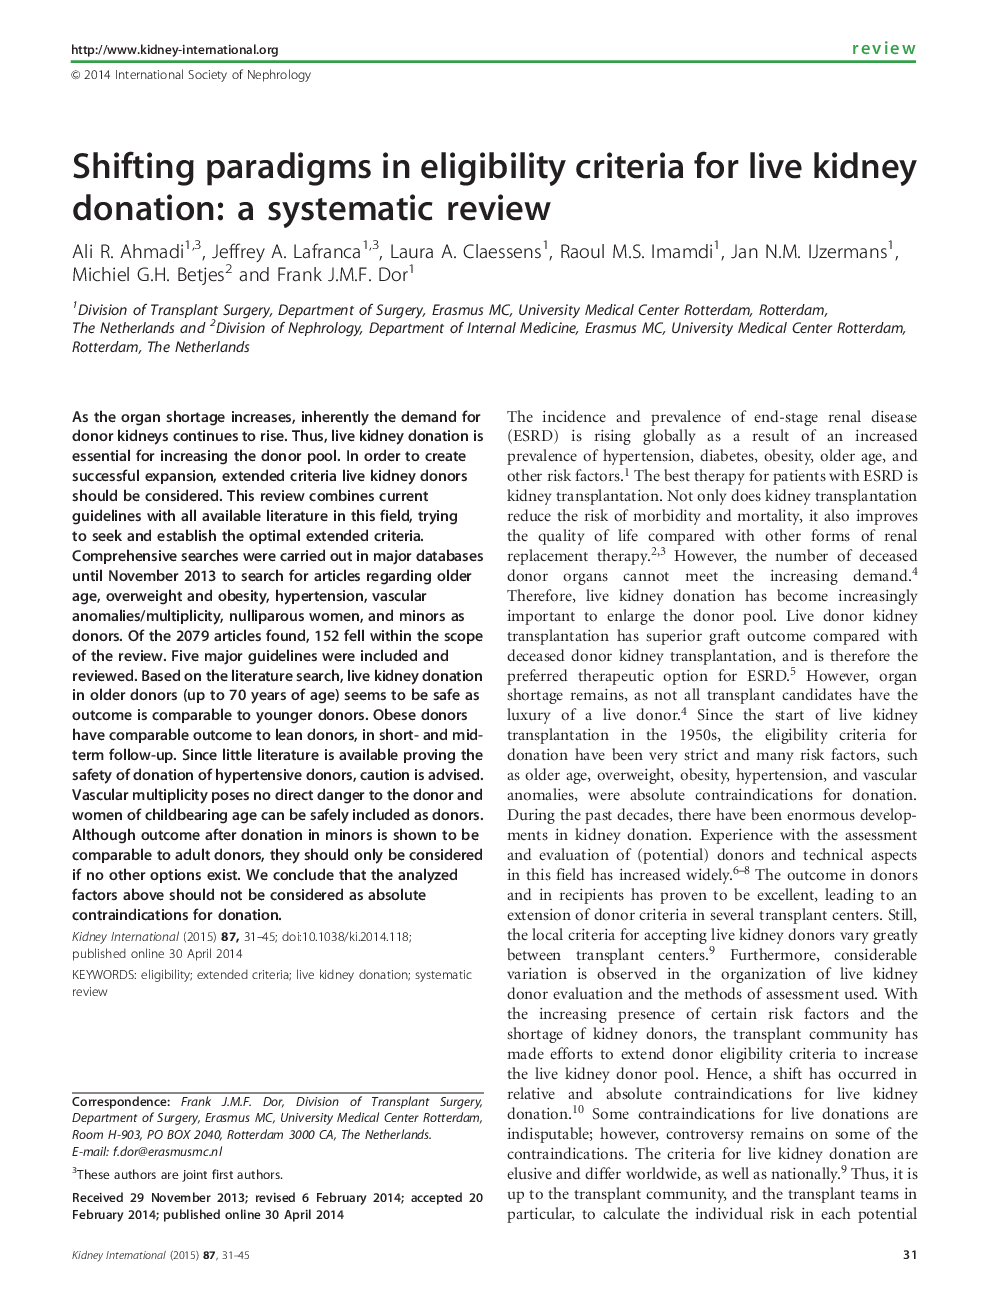 Shifting paradigms in eligibility criteria for live kidney donation: a systematic review